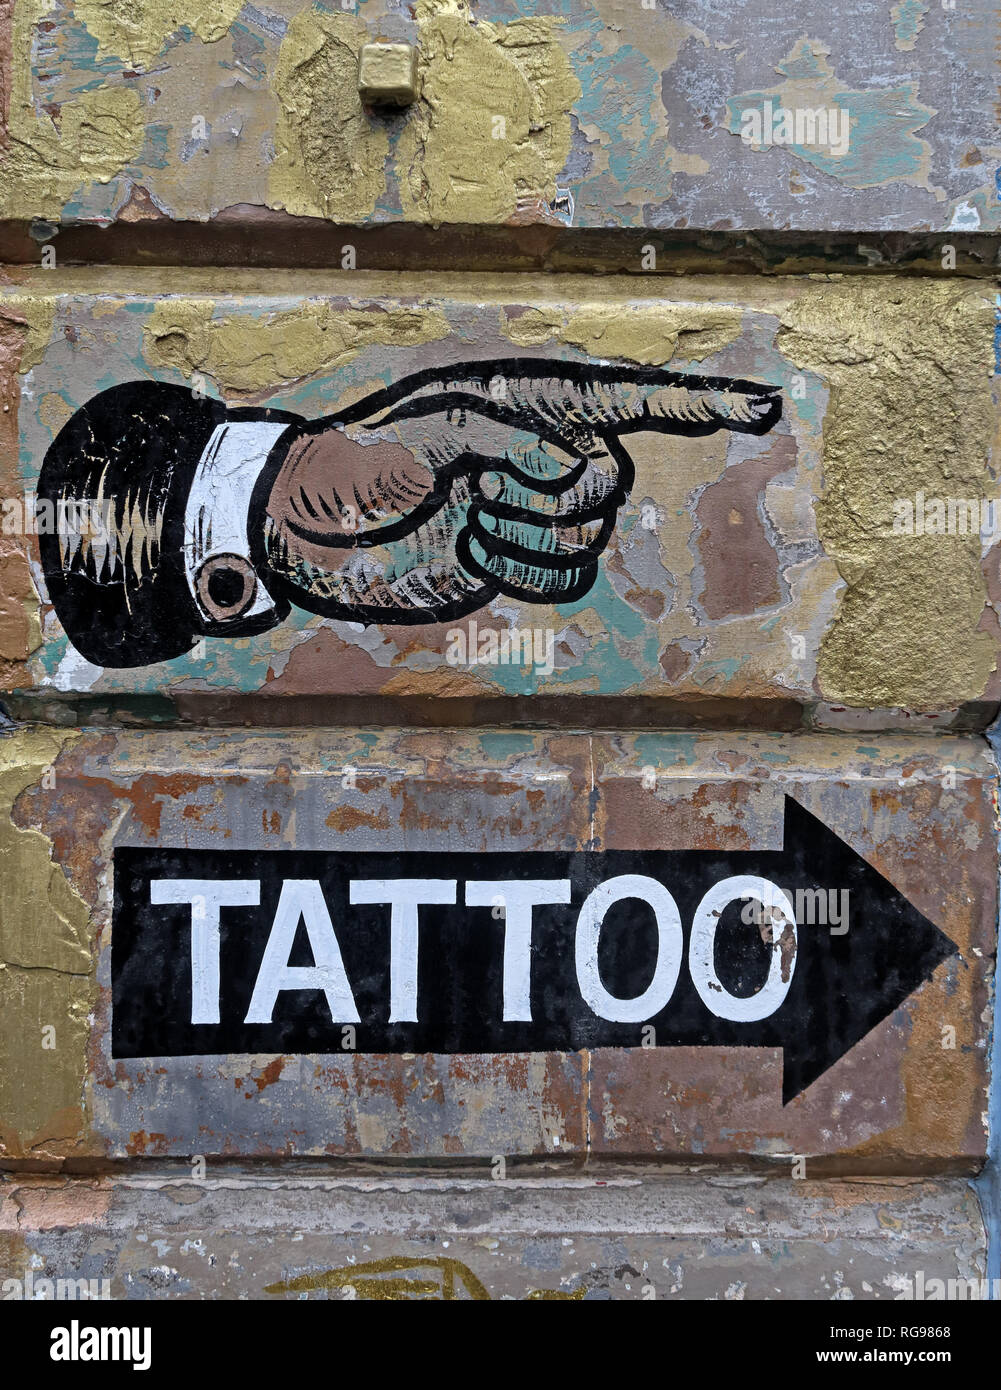 Hand pointing towards the right, Tattoo shop this way, painted sign on wall, Edinburgh, Scotland, UK Stock Photo